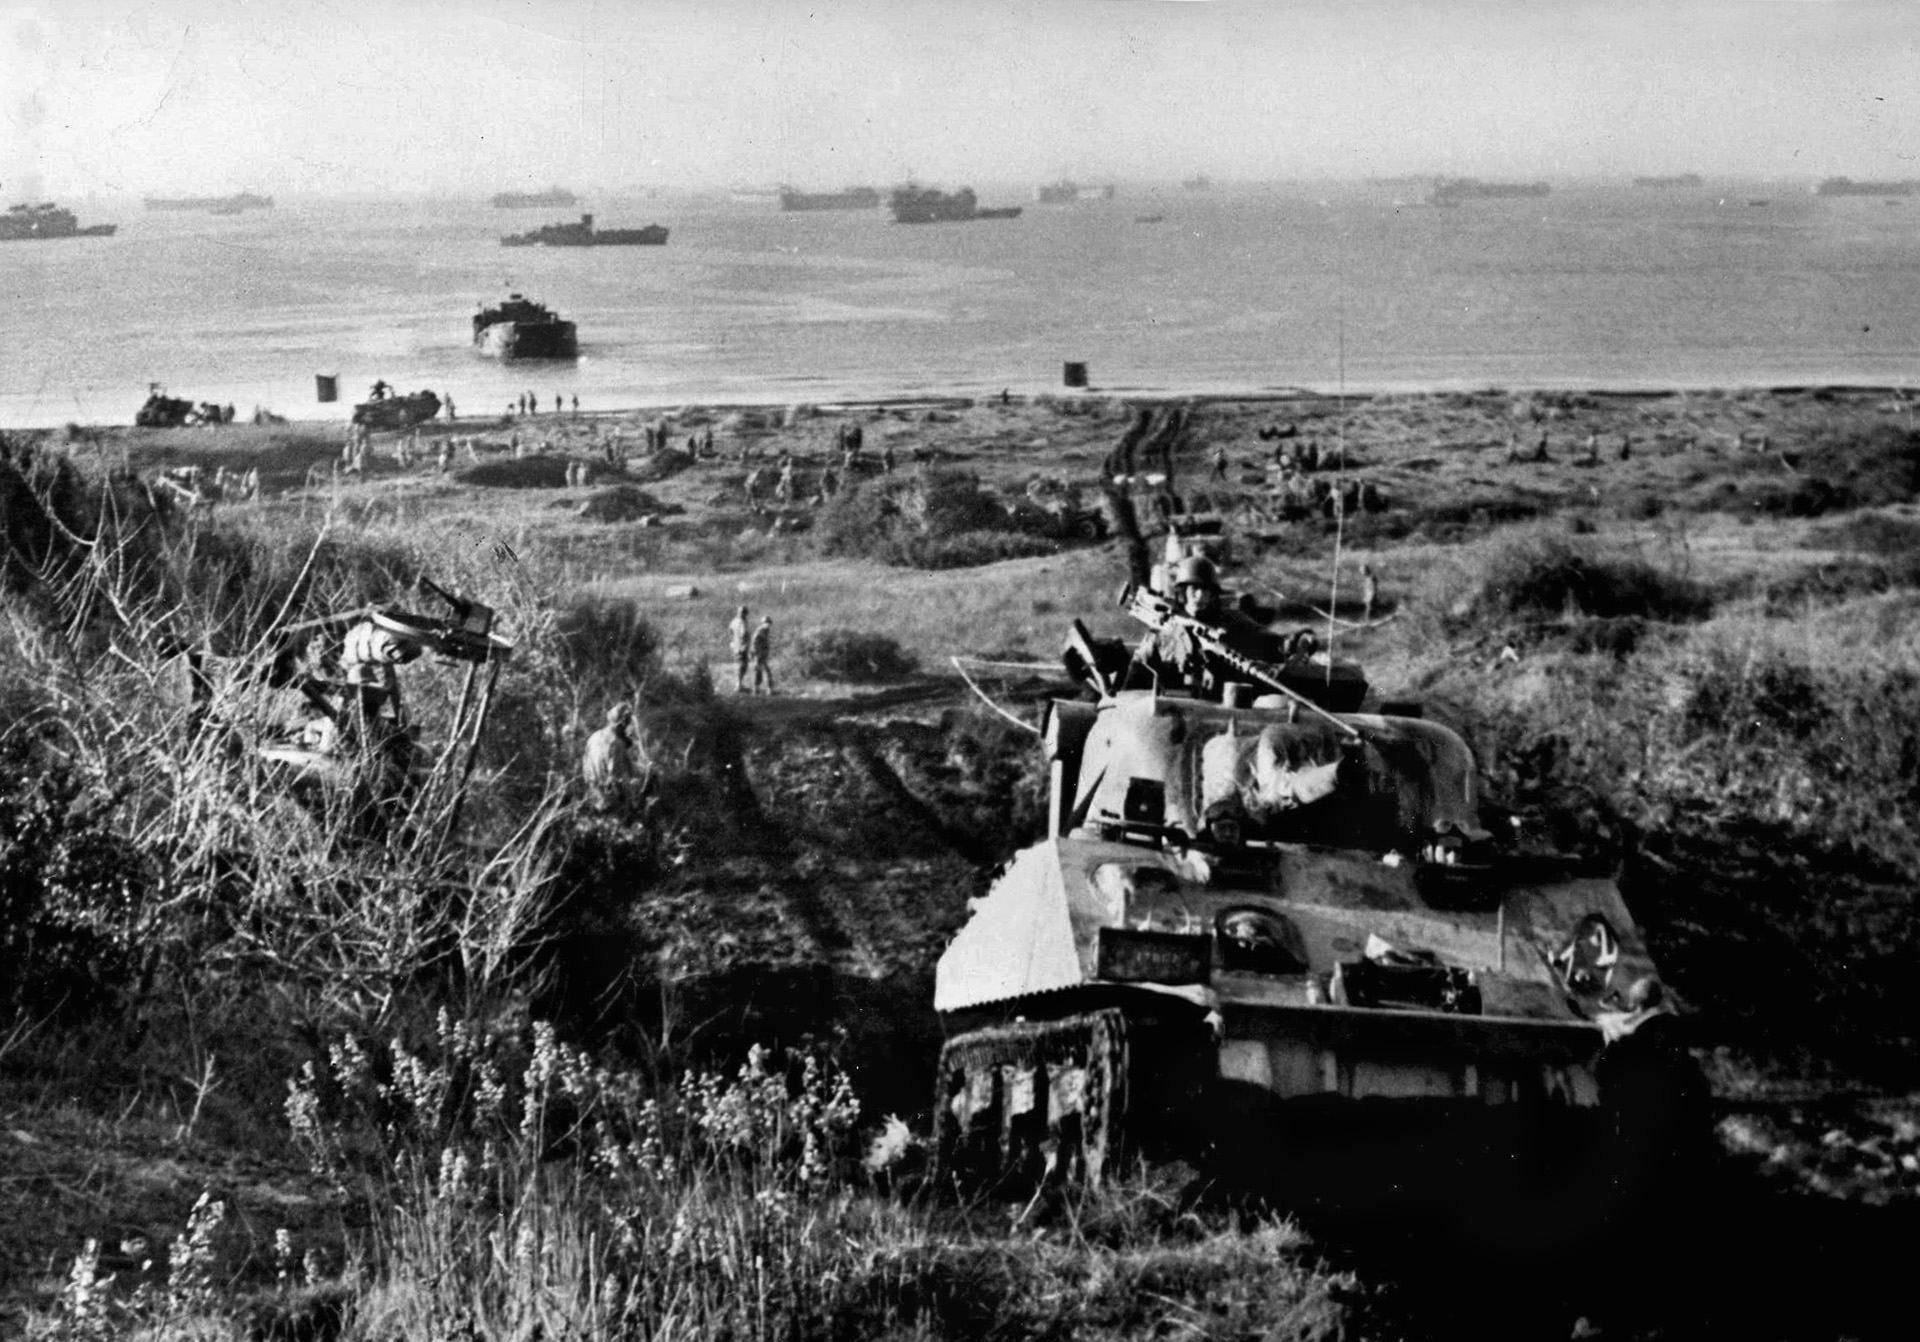 An American tank rolls forward to the crest of a hill just off the beach at Anzio. When the Germans realized that Rome was threatened, they reacted swiftly and hemmed in the VI Corps on the beach. The result was a months-long, bloody stalemate.